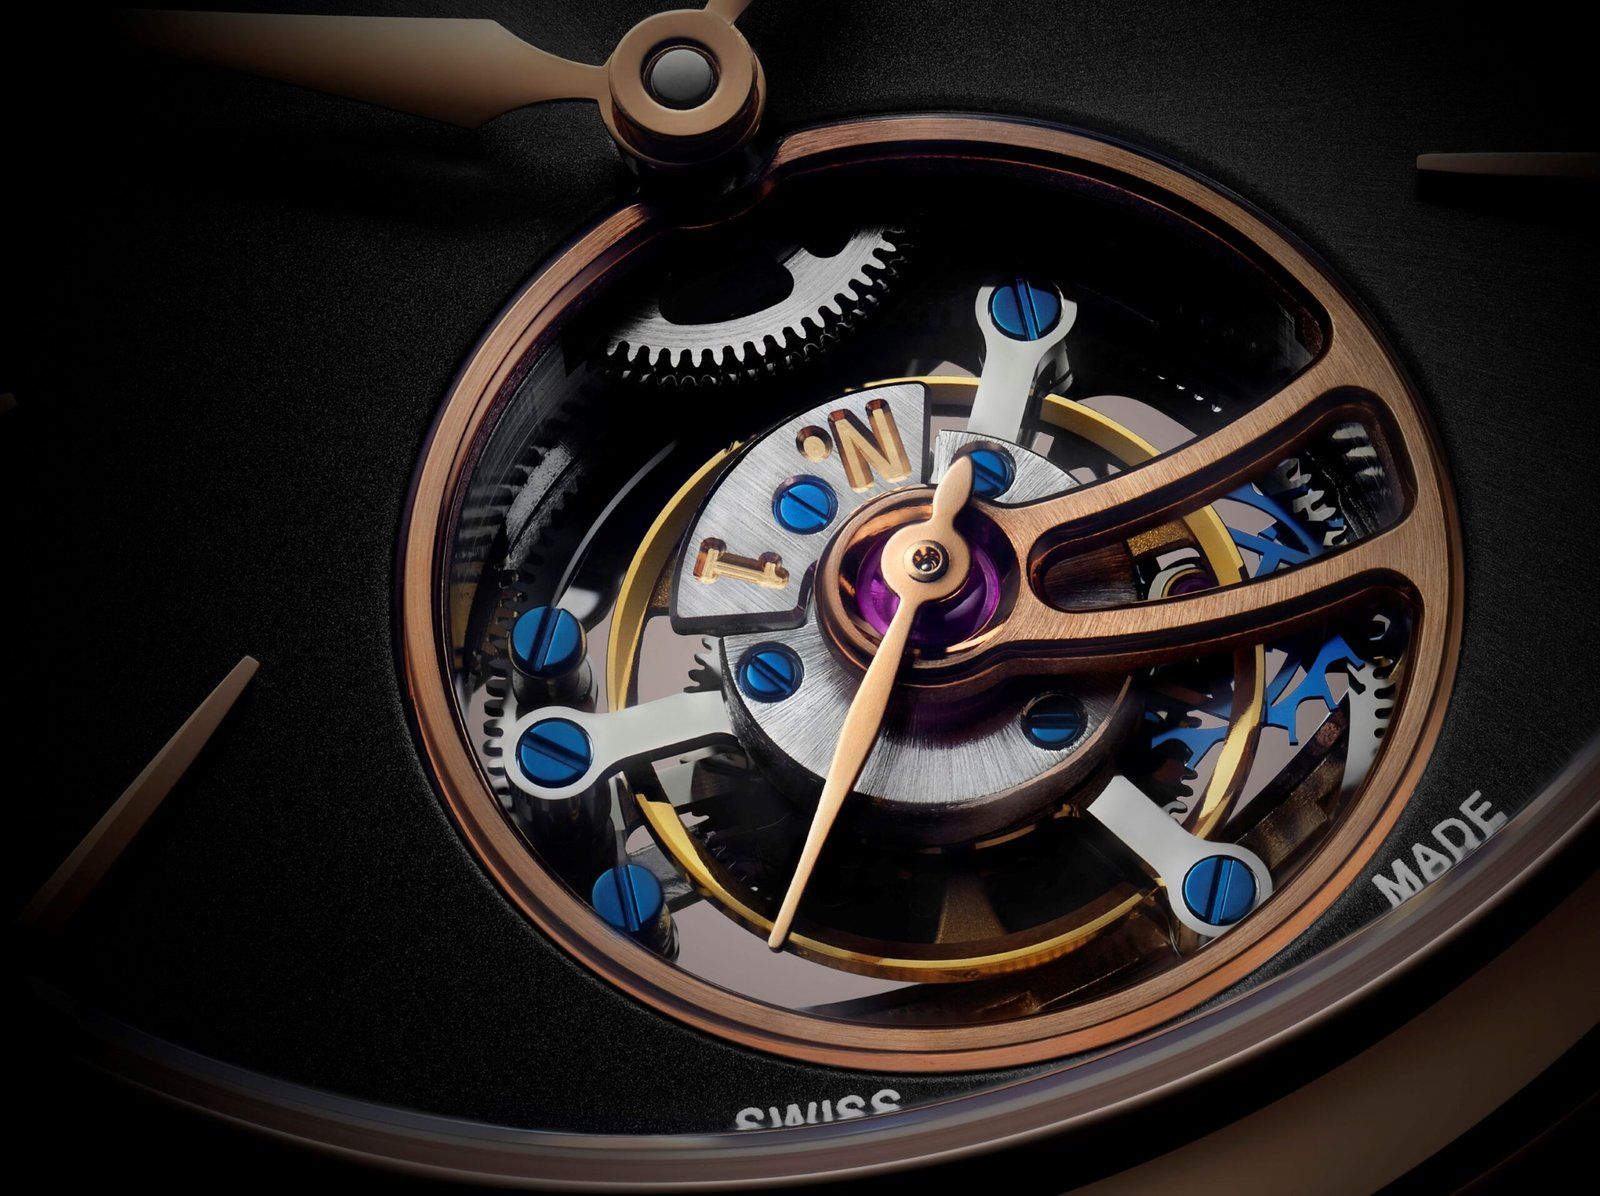 A discreet hand passing above the tourbillon cage marks off the seconds.